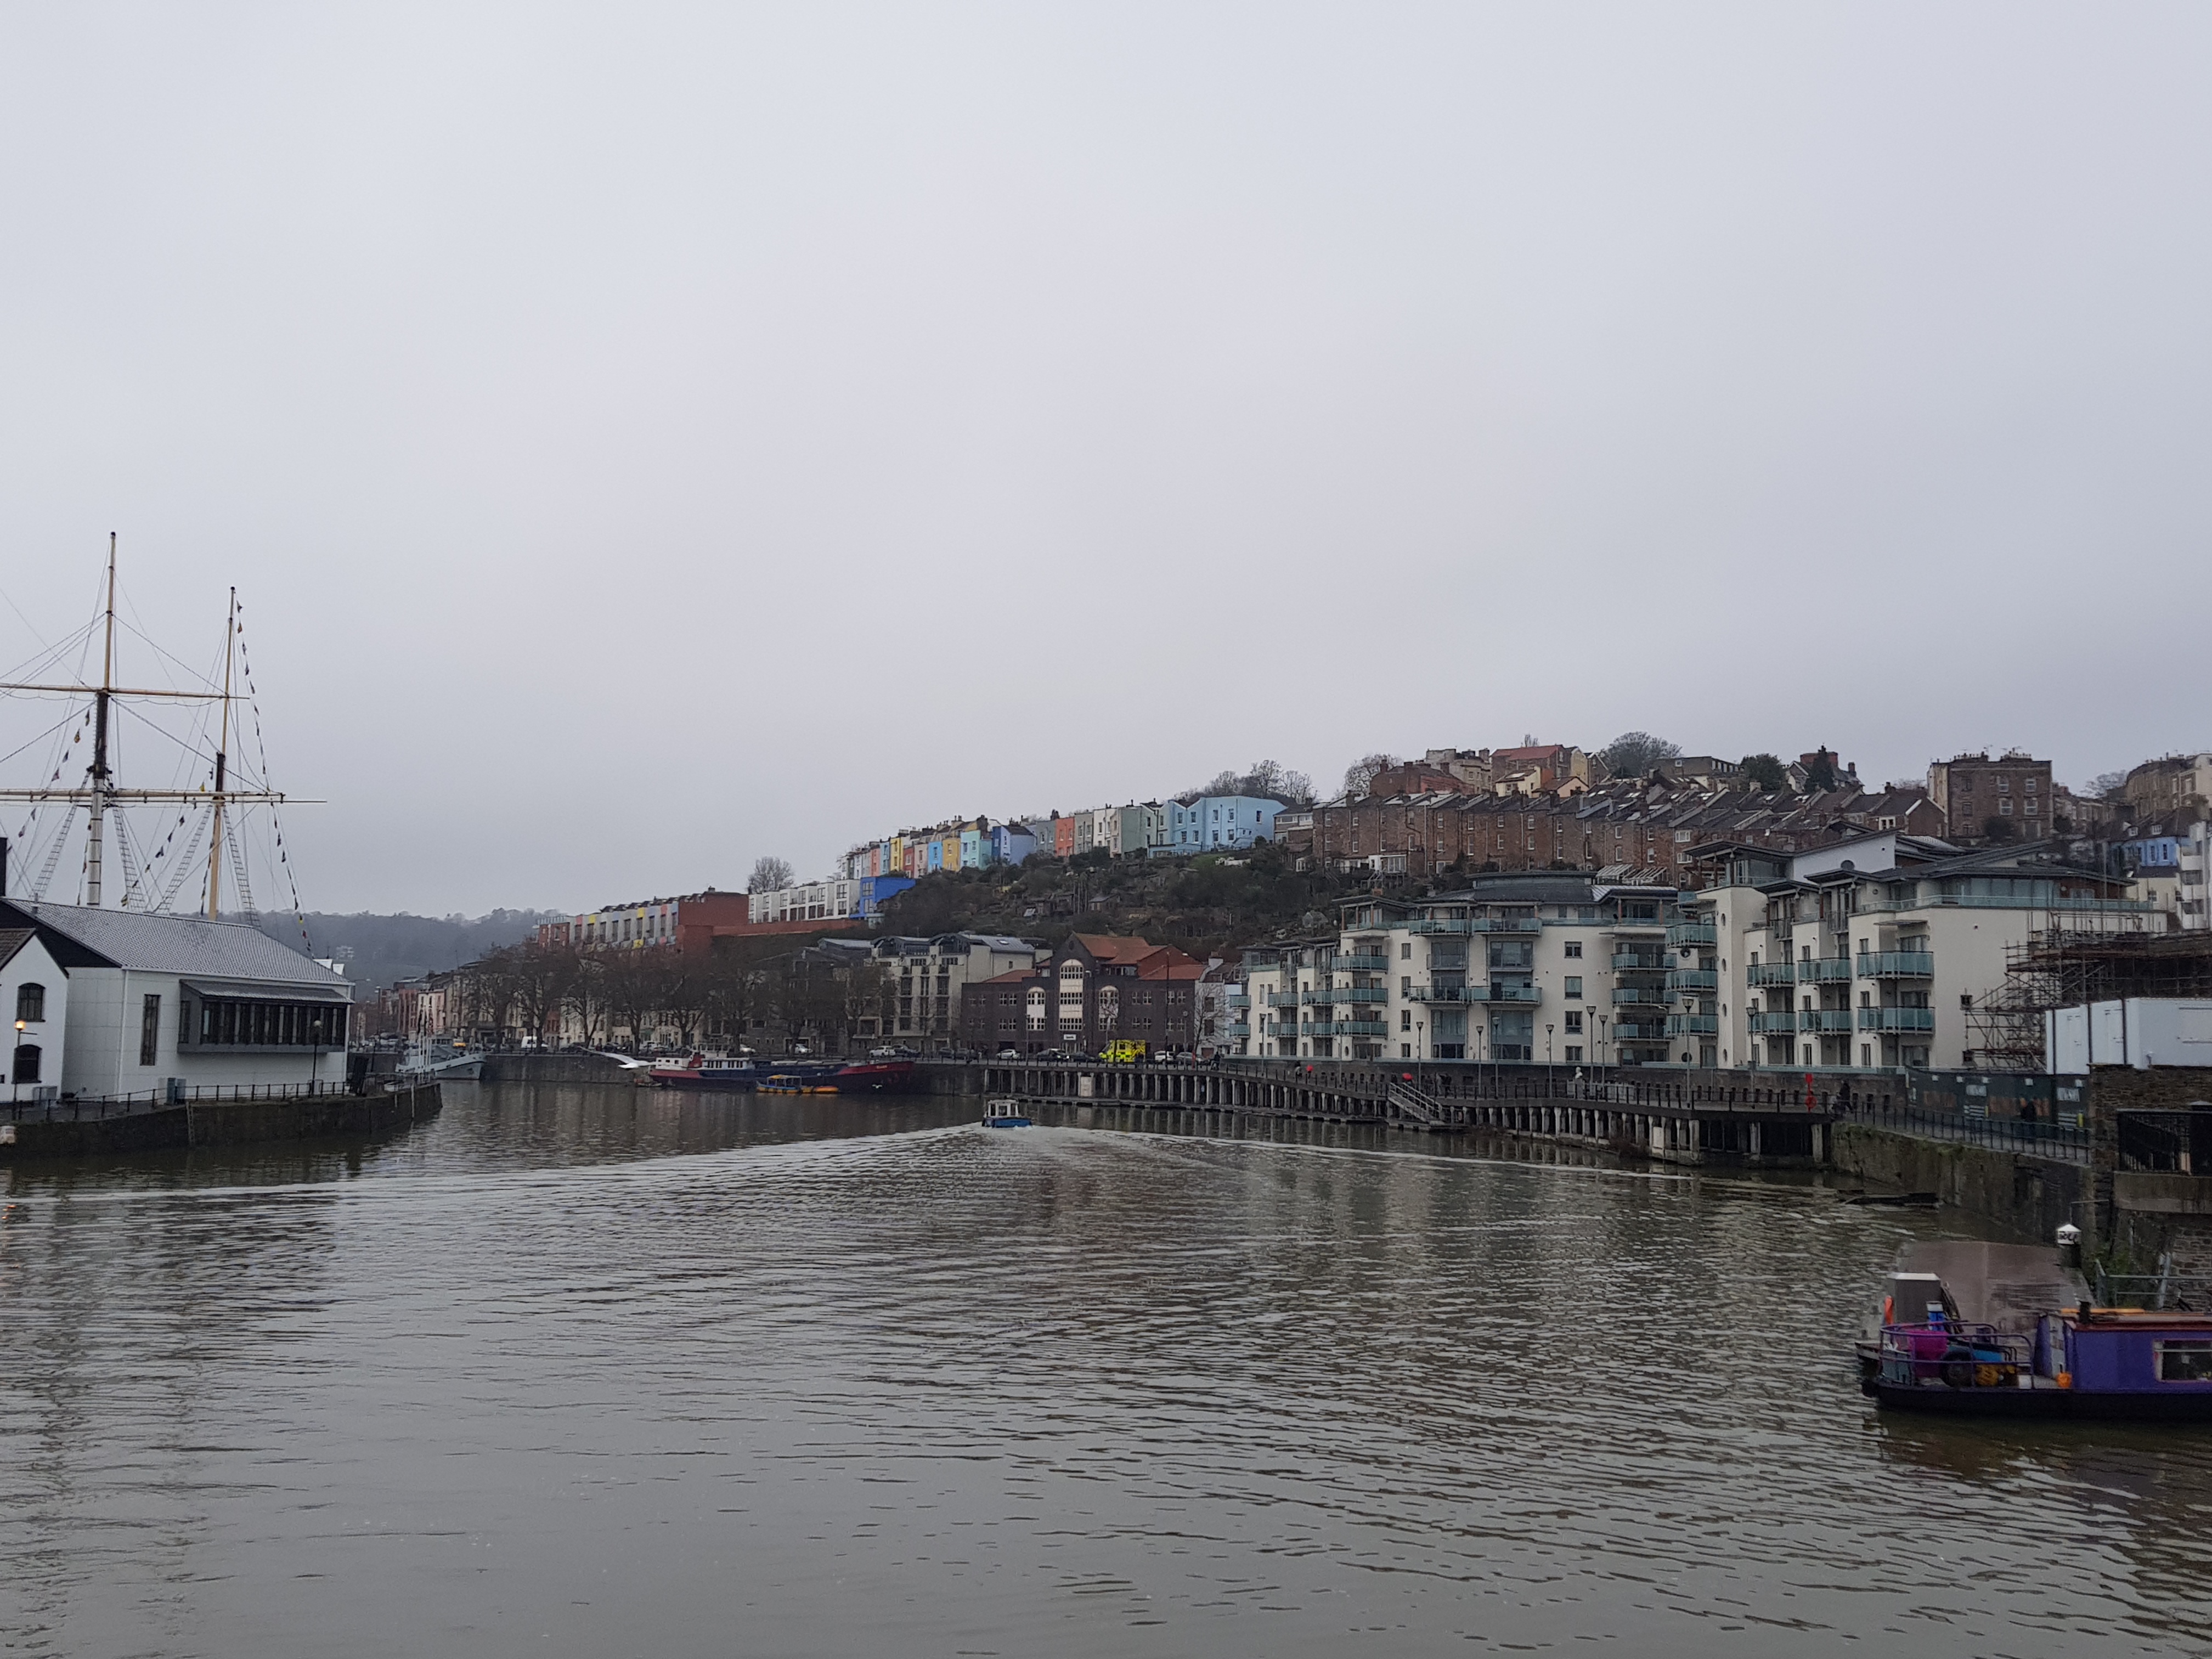 Bristol Harbour - a beautiful backdrop for a run, even in bad weather